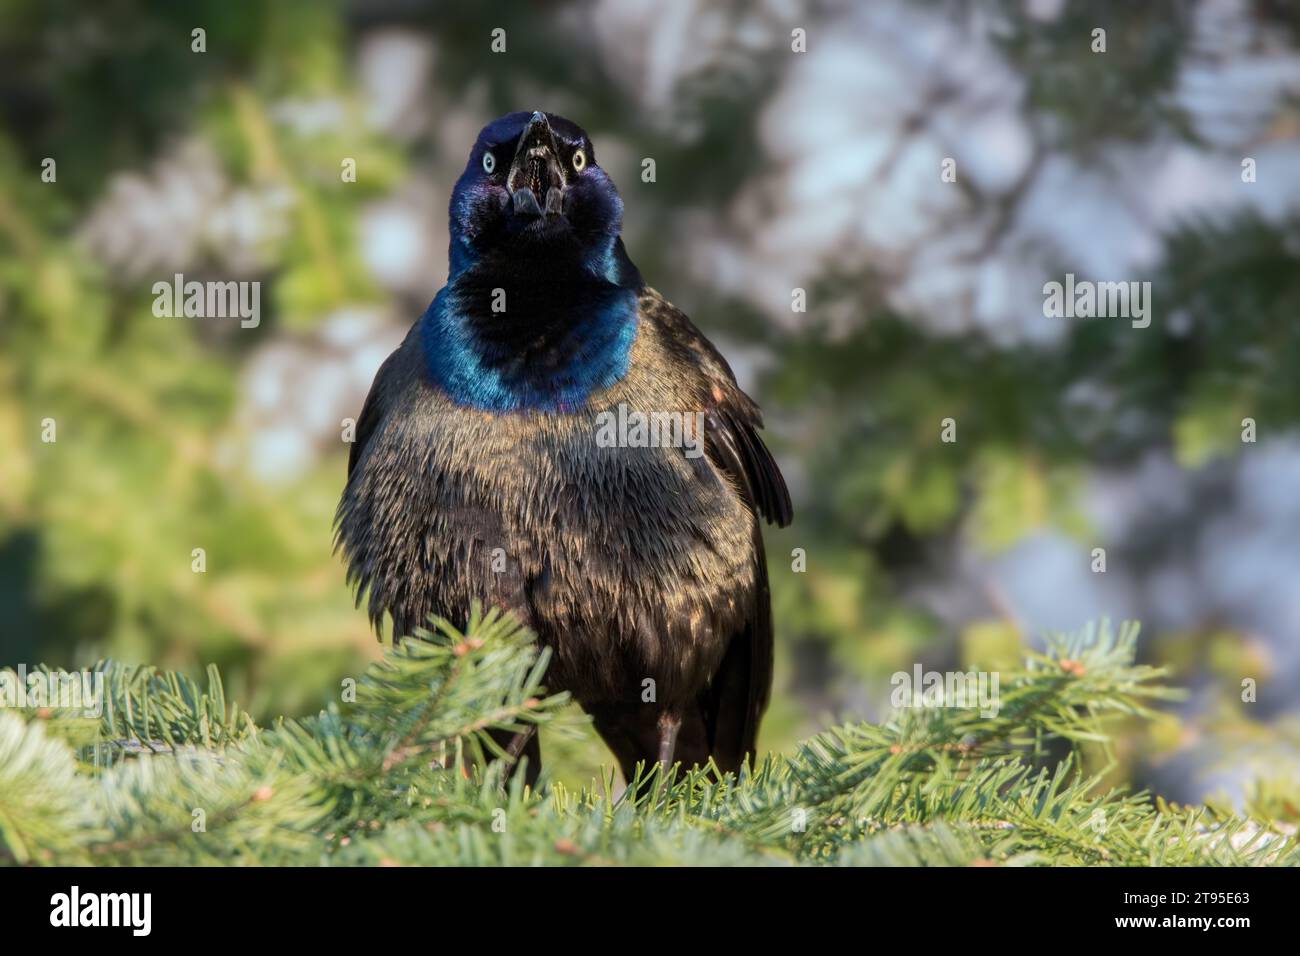 Male Common Grackle (Quiscalus quiscula) perching in White Spruce boughs, blurry background in the Chippewa National Forest, northern Minnesota USA Stock Photo